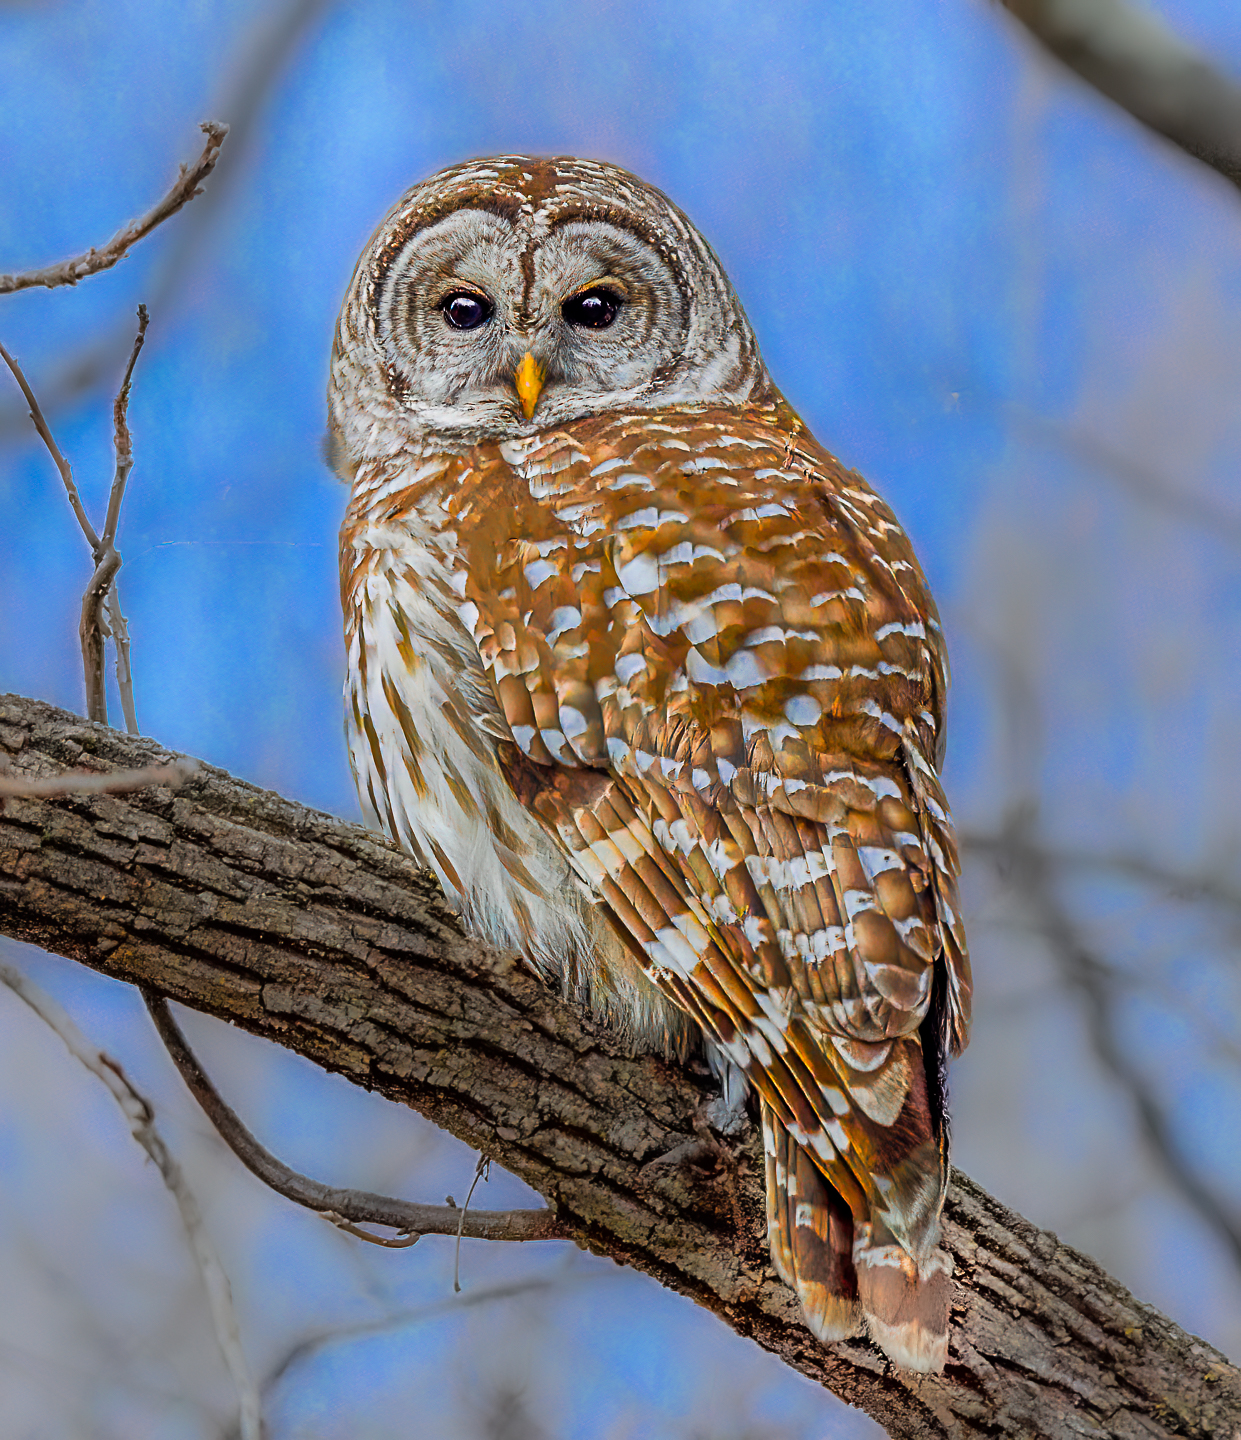 2nd Grand Award For Year End Nature In Class 1 By Melanie Berlin For Hoo Gives A Hoot With 24.5 Points in MAY-10-2023.jpg